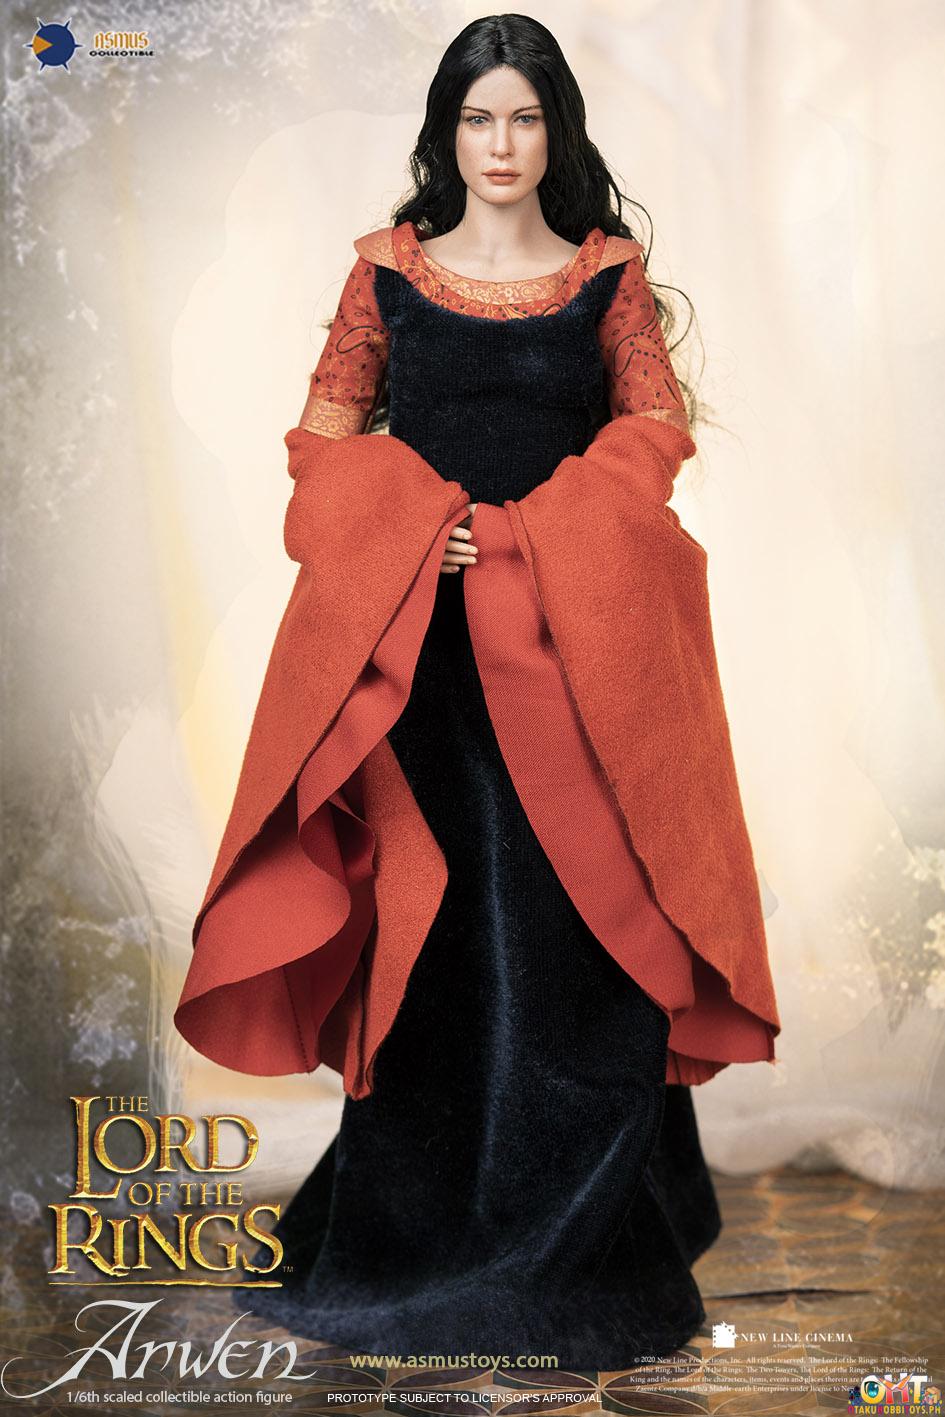 Asmus Toys LOTR028 The Lord of the Rings Series Arwen (Standard Edition)